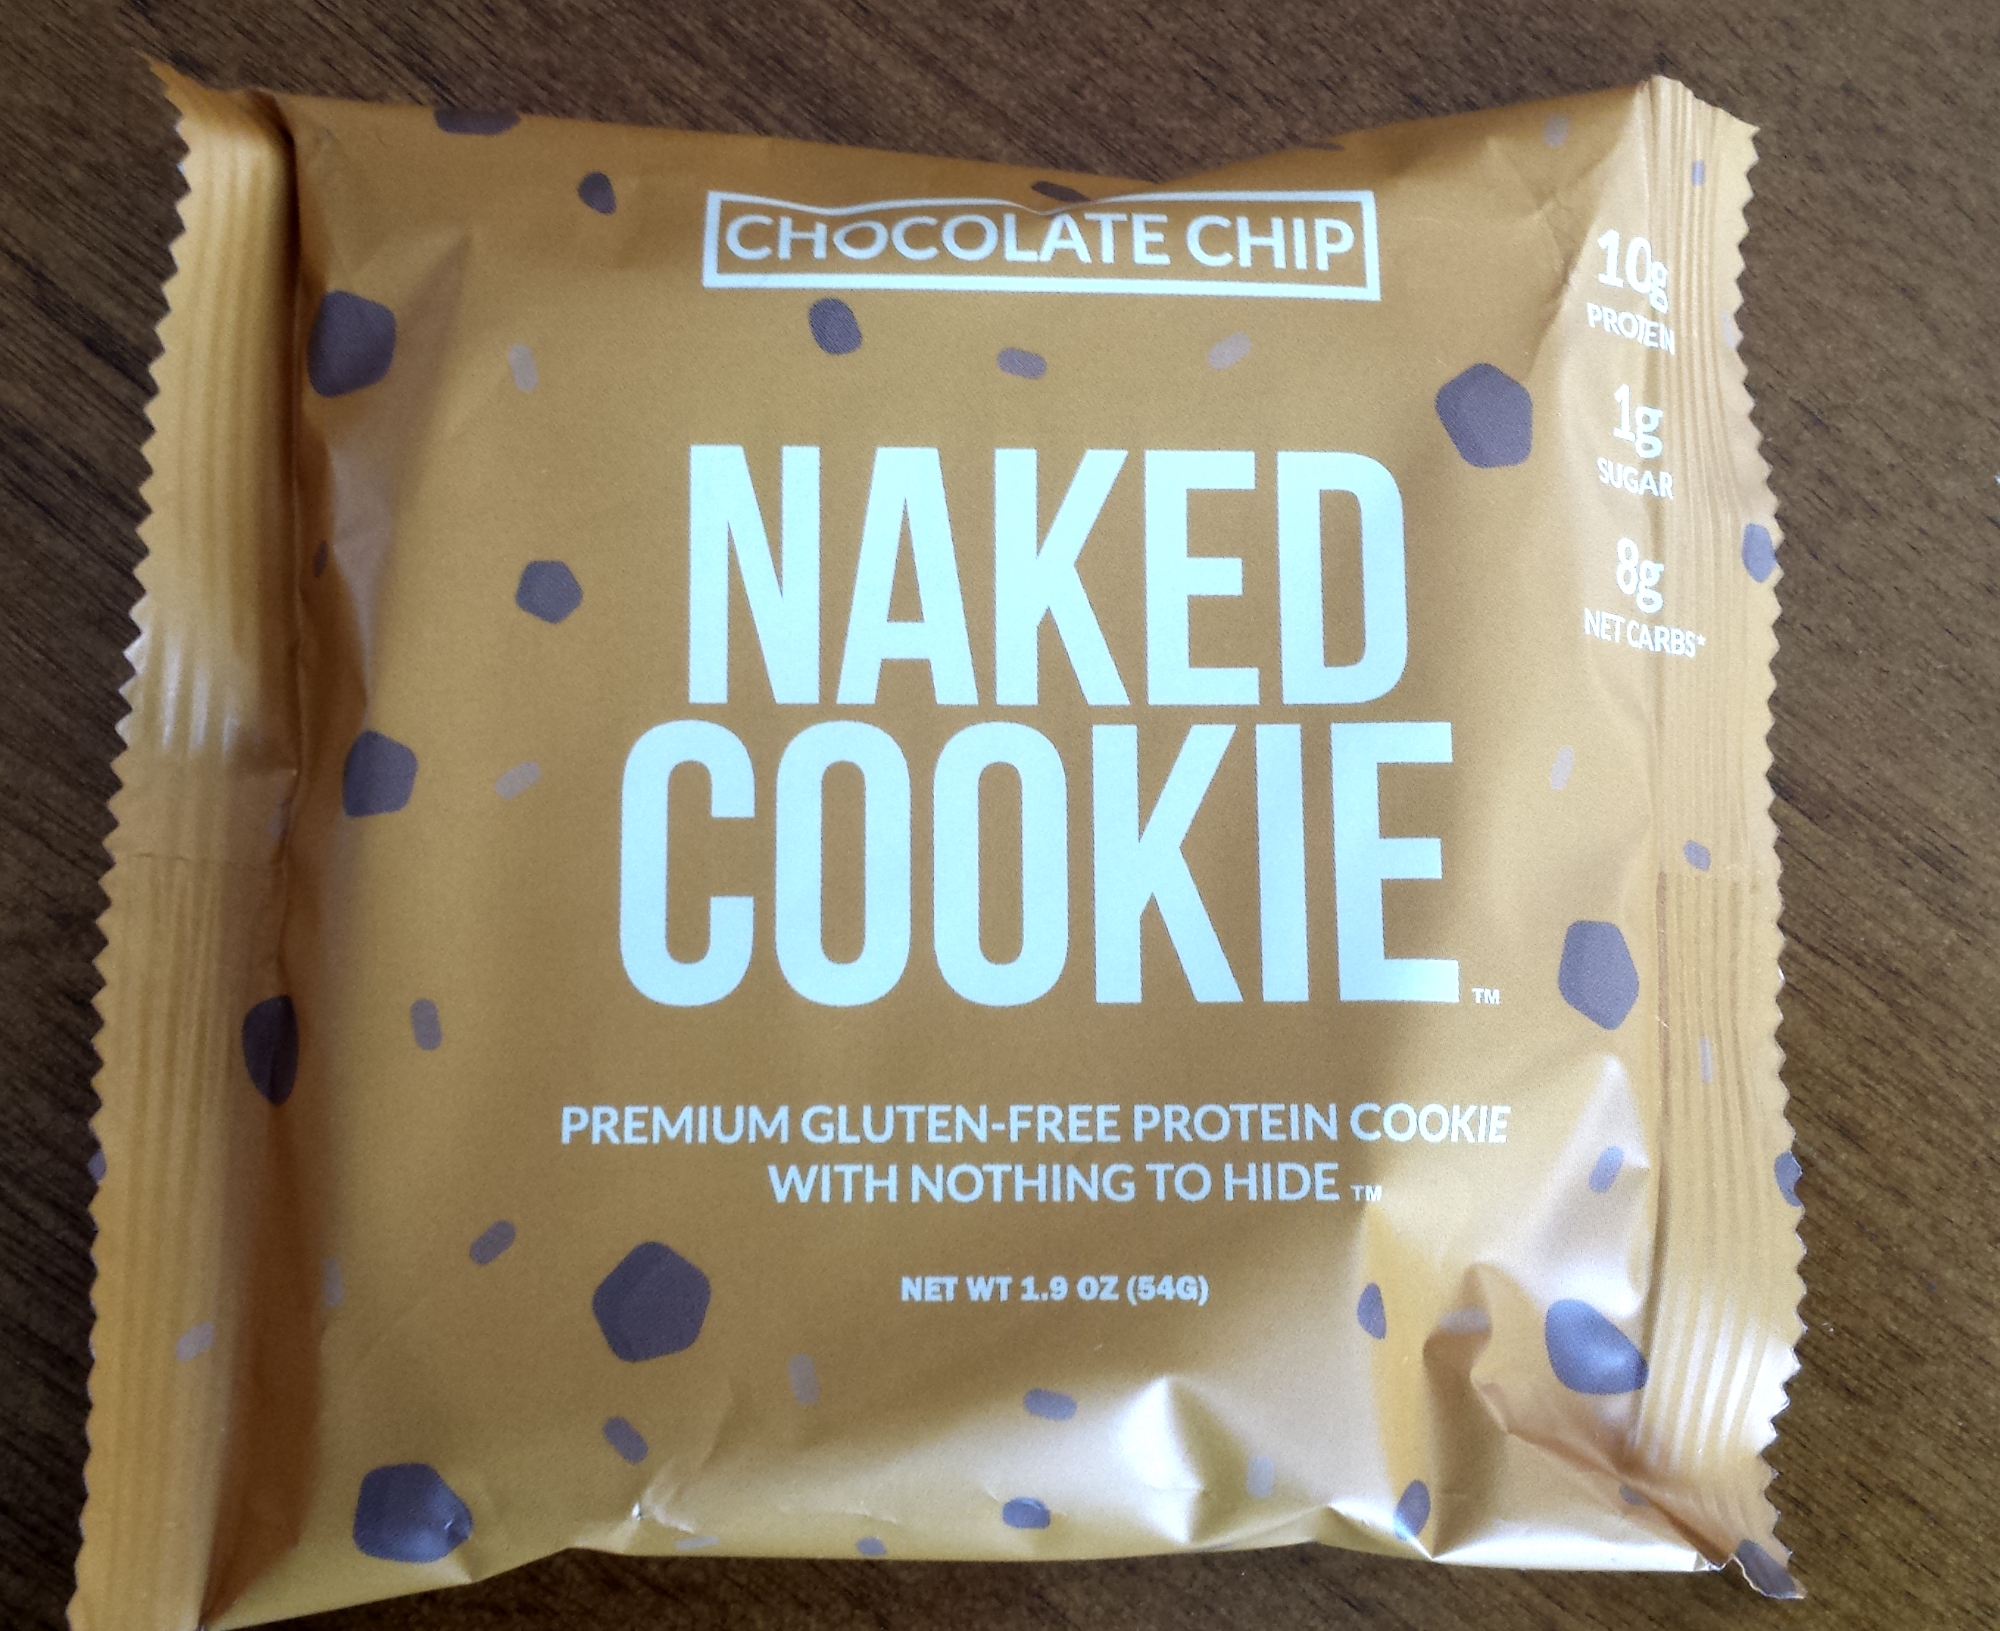 Chocolate chip protein cookie from Naked Nutrition made with almond flour and whey - 10 grams of protein, gluten free